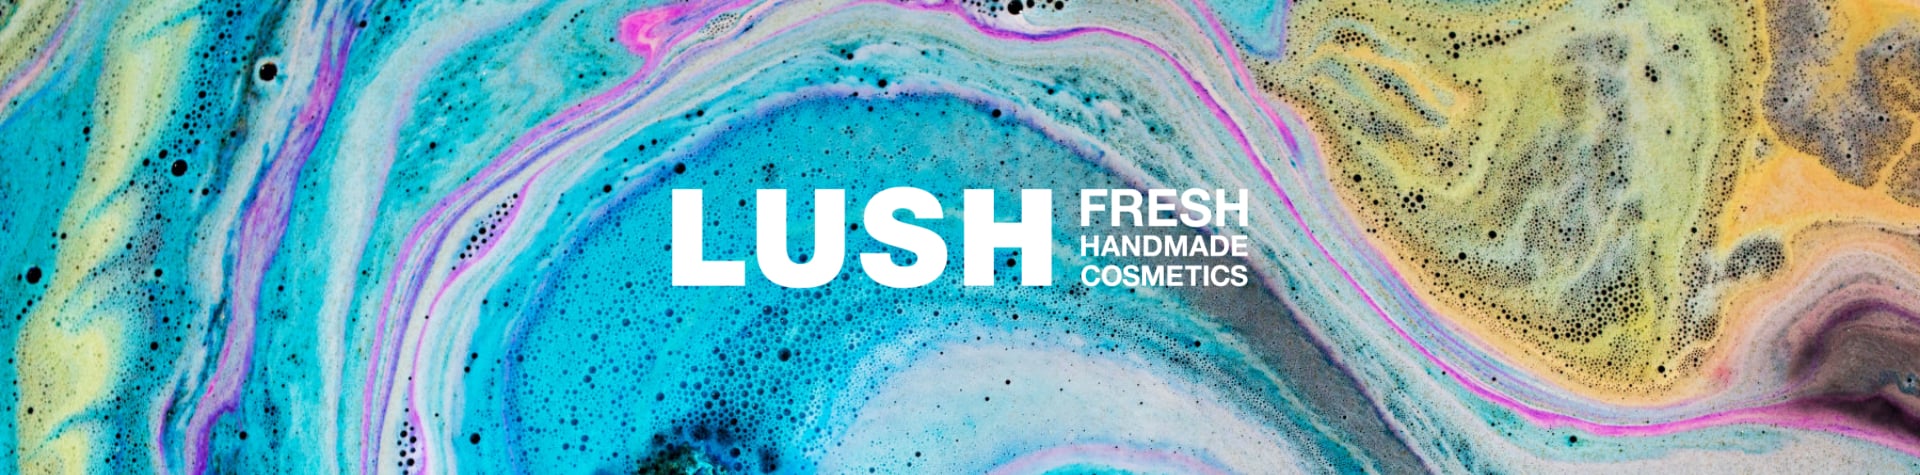 Lush Online Store in the Philippines